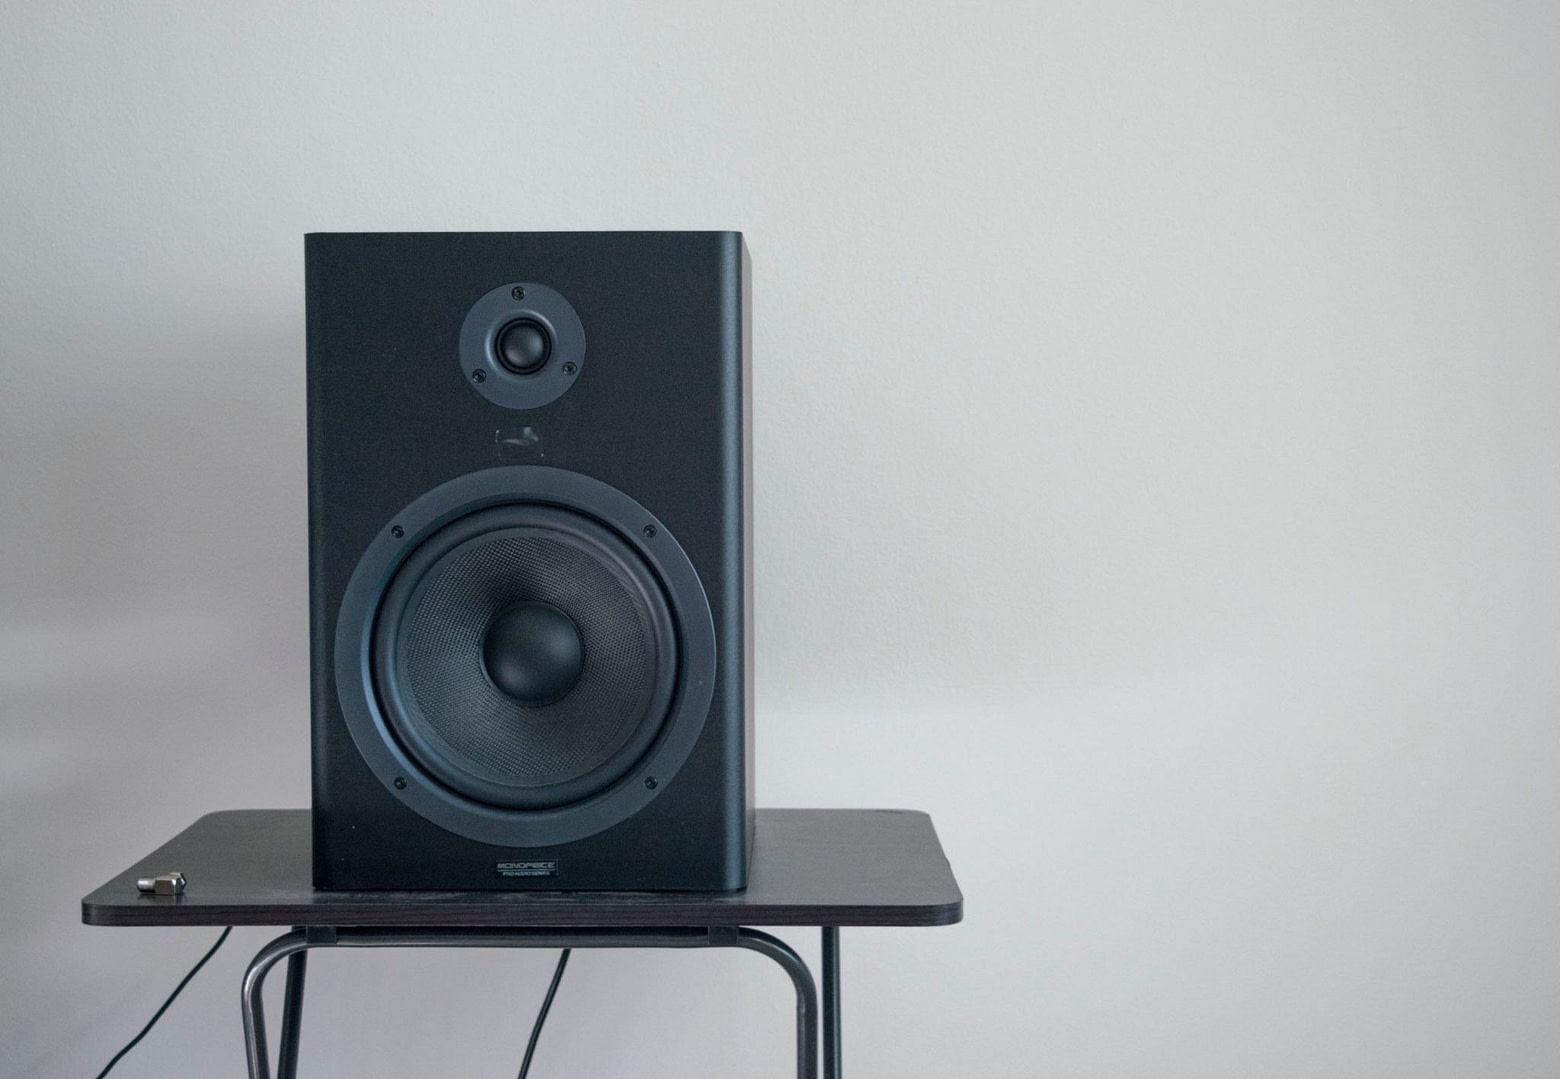 “The Only Thing That Matters Is What Comes Out Of The Speakers”